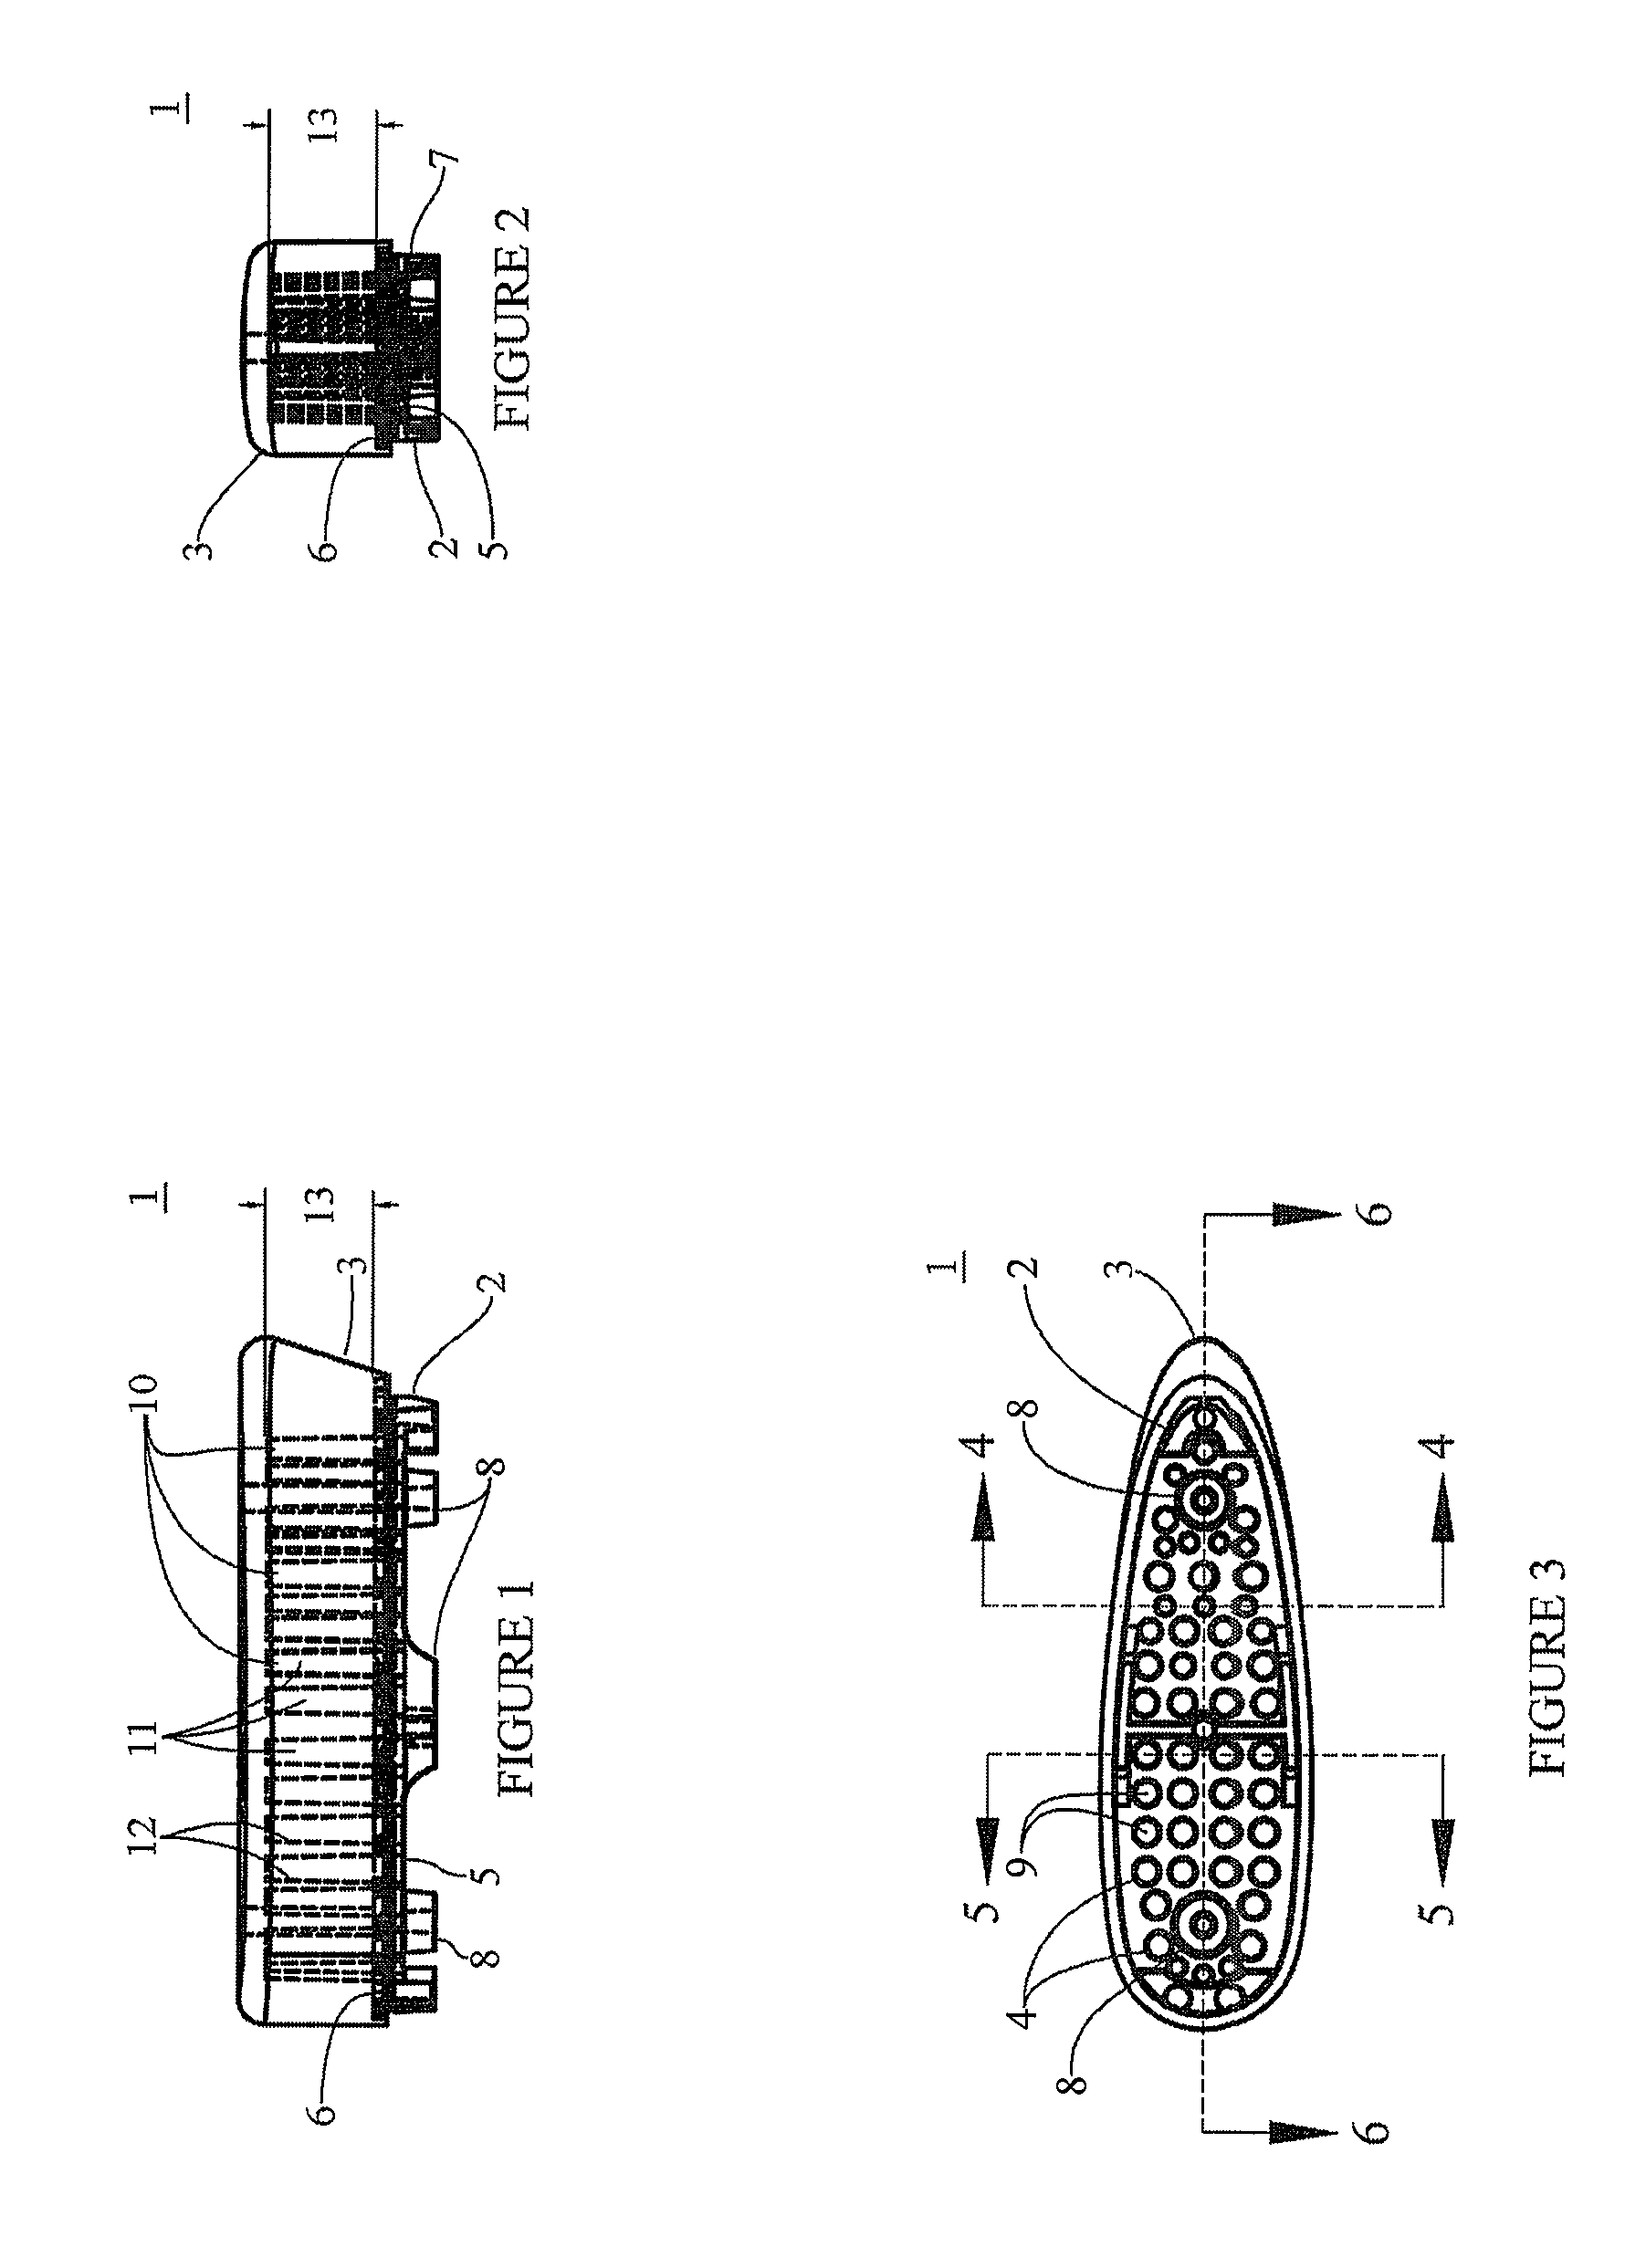 Method of producing a recoil pad for a weapon